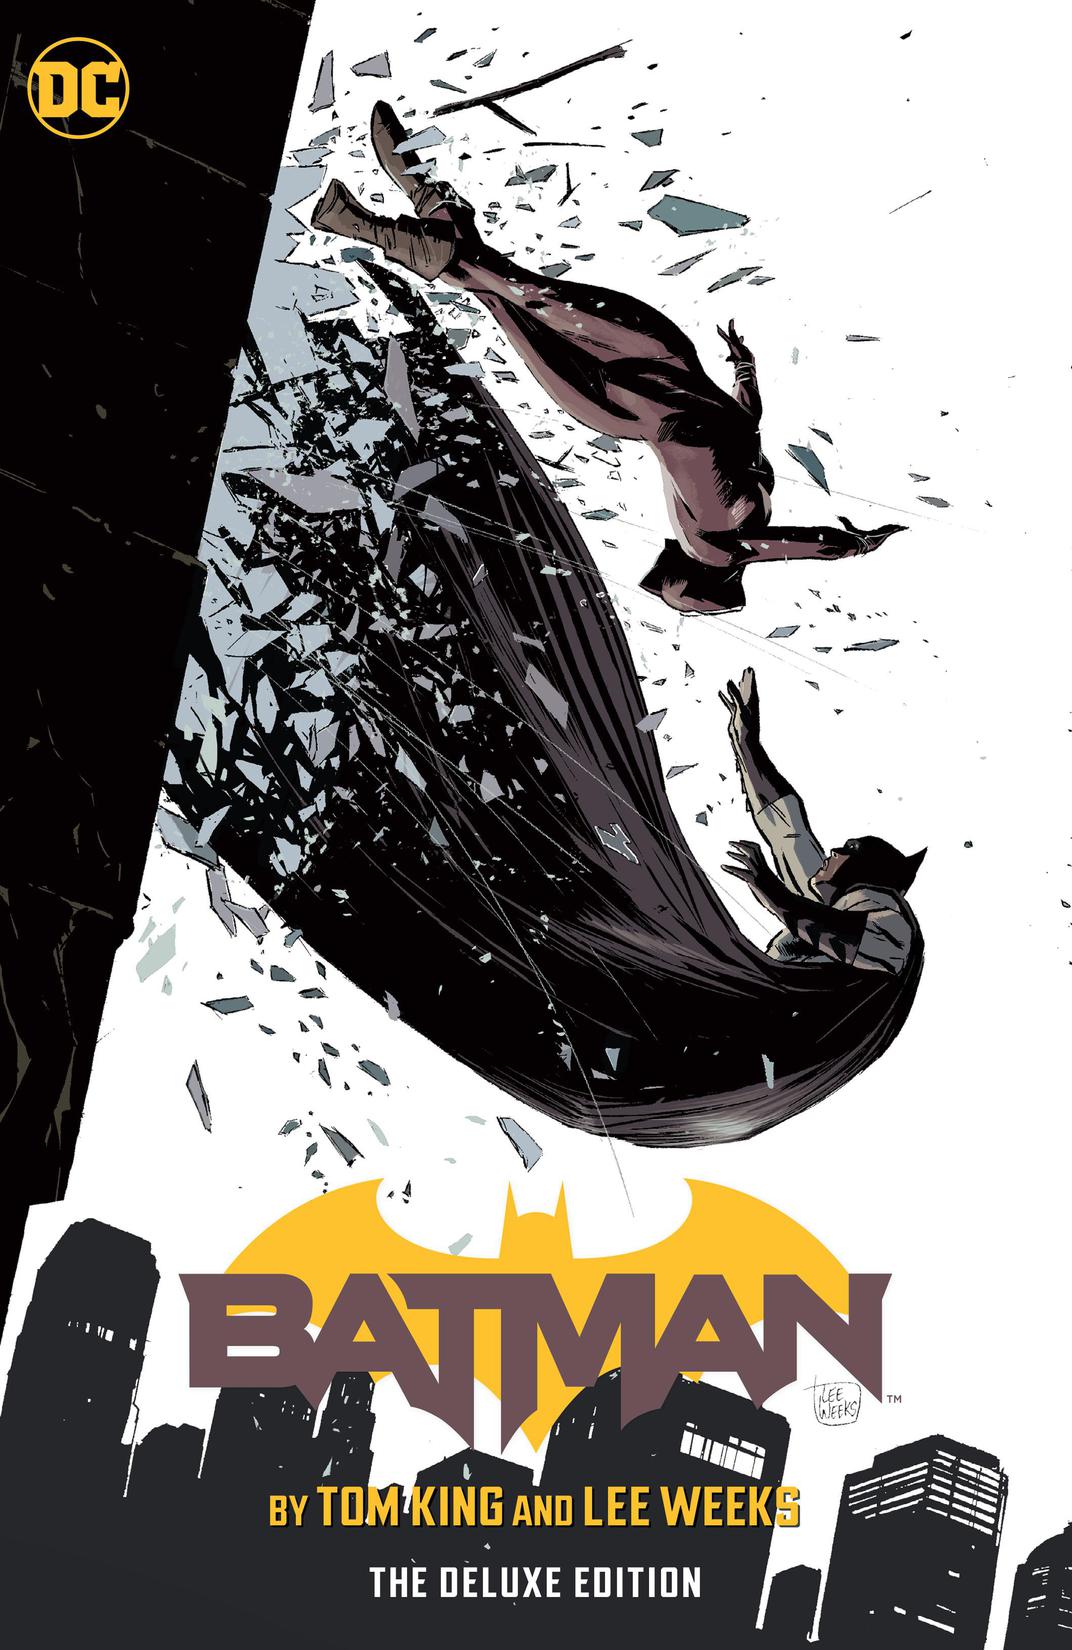 Batman by Tom King & Lee Weeks: The Deluxe Edition preview images